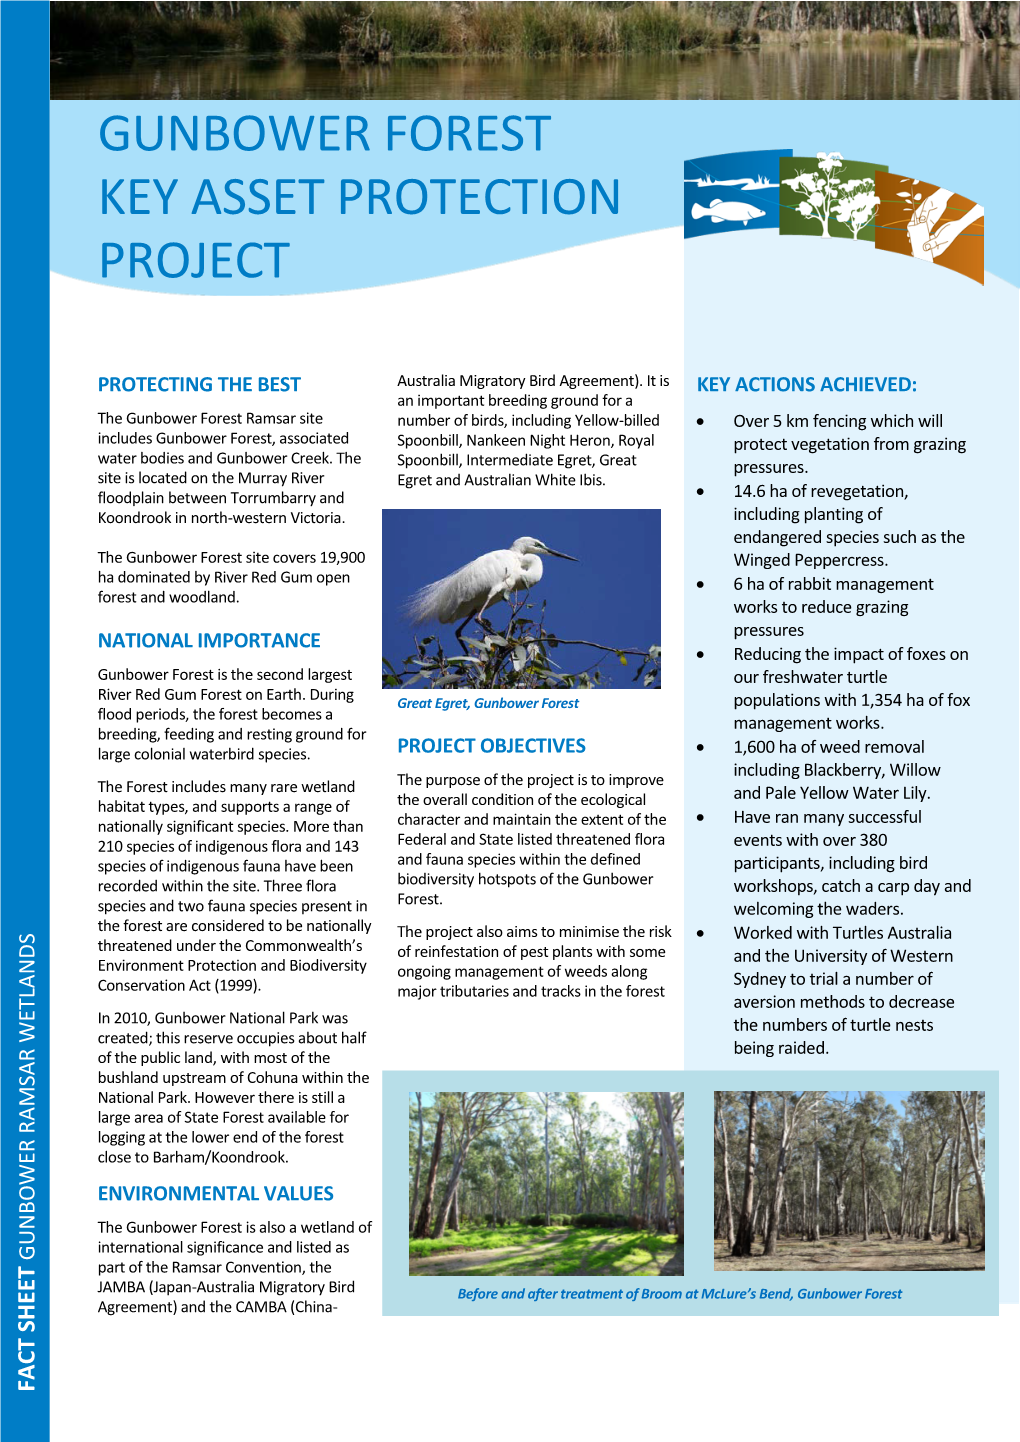 Gunbower Forest Key Asset Protection Project